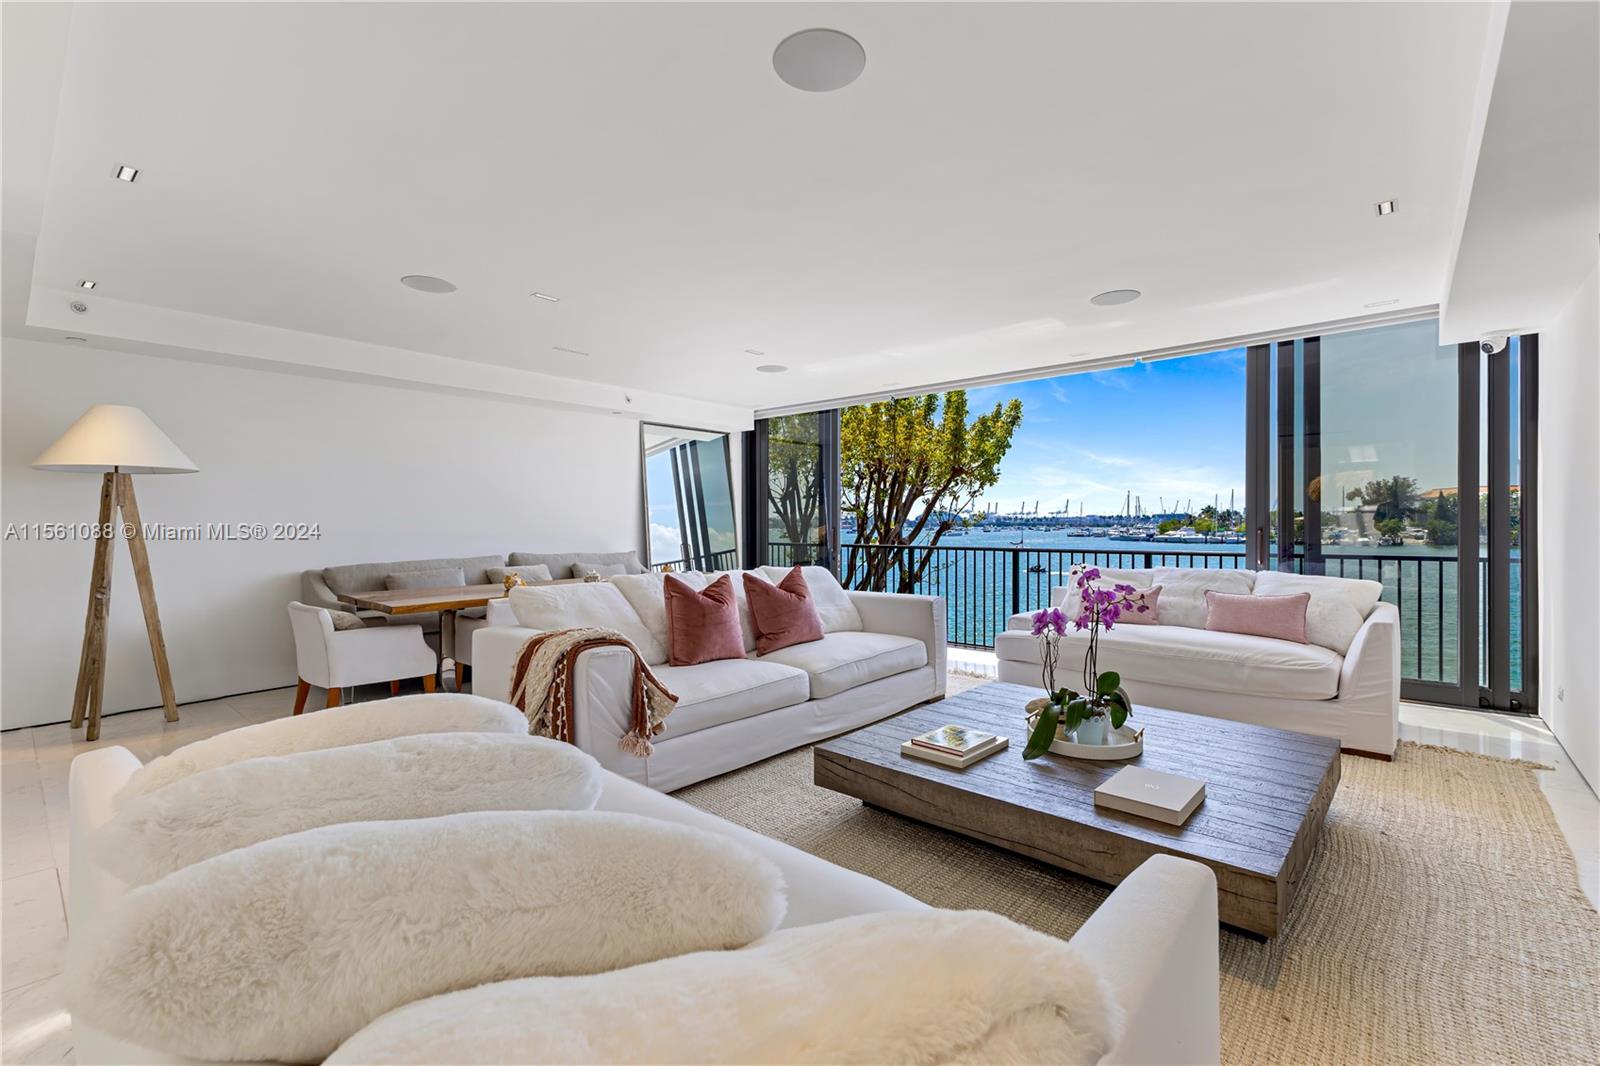 Live on the Venetian Islands without the $15M price tag! This newly renovated 4-story townhome boasts 4 bed 3.5 baths with 4,323SF of living space and offers stunning views of Biscayne Bay and the Miami Skyline.  Features include marble floors, gourmet chef's kitchen with SubZero refrigerator, induction stove, Bosch appliances, custom kitchen cabinetry, pre-wired automation for Control 4, new AC’s, elevator and motorized shades.  Crowned by 1,500/SF of rooftop terraces with an outdoor kitchen and hot tub makes the perfect setting for entertaining.  2 parking spaces including 2 Tesla chargers and 1 space inside the garage.  Enjoy the best of single-family living with the abundance of amenities and security provided at the iconic 1000 Venetian.